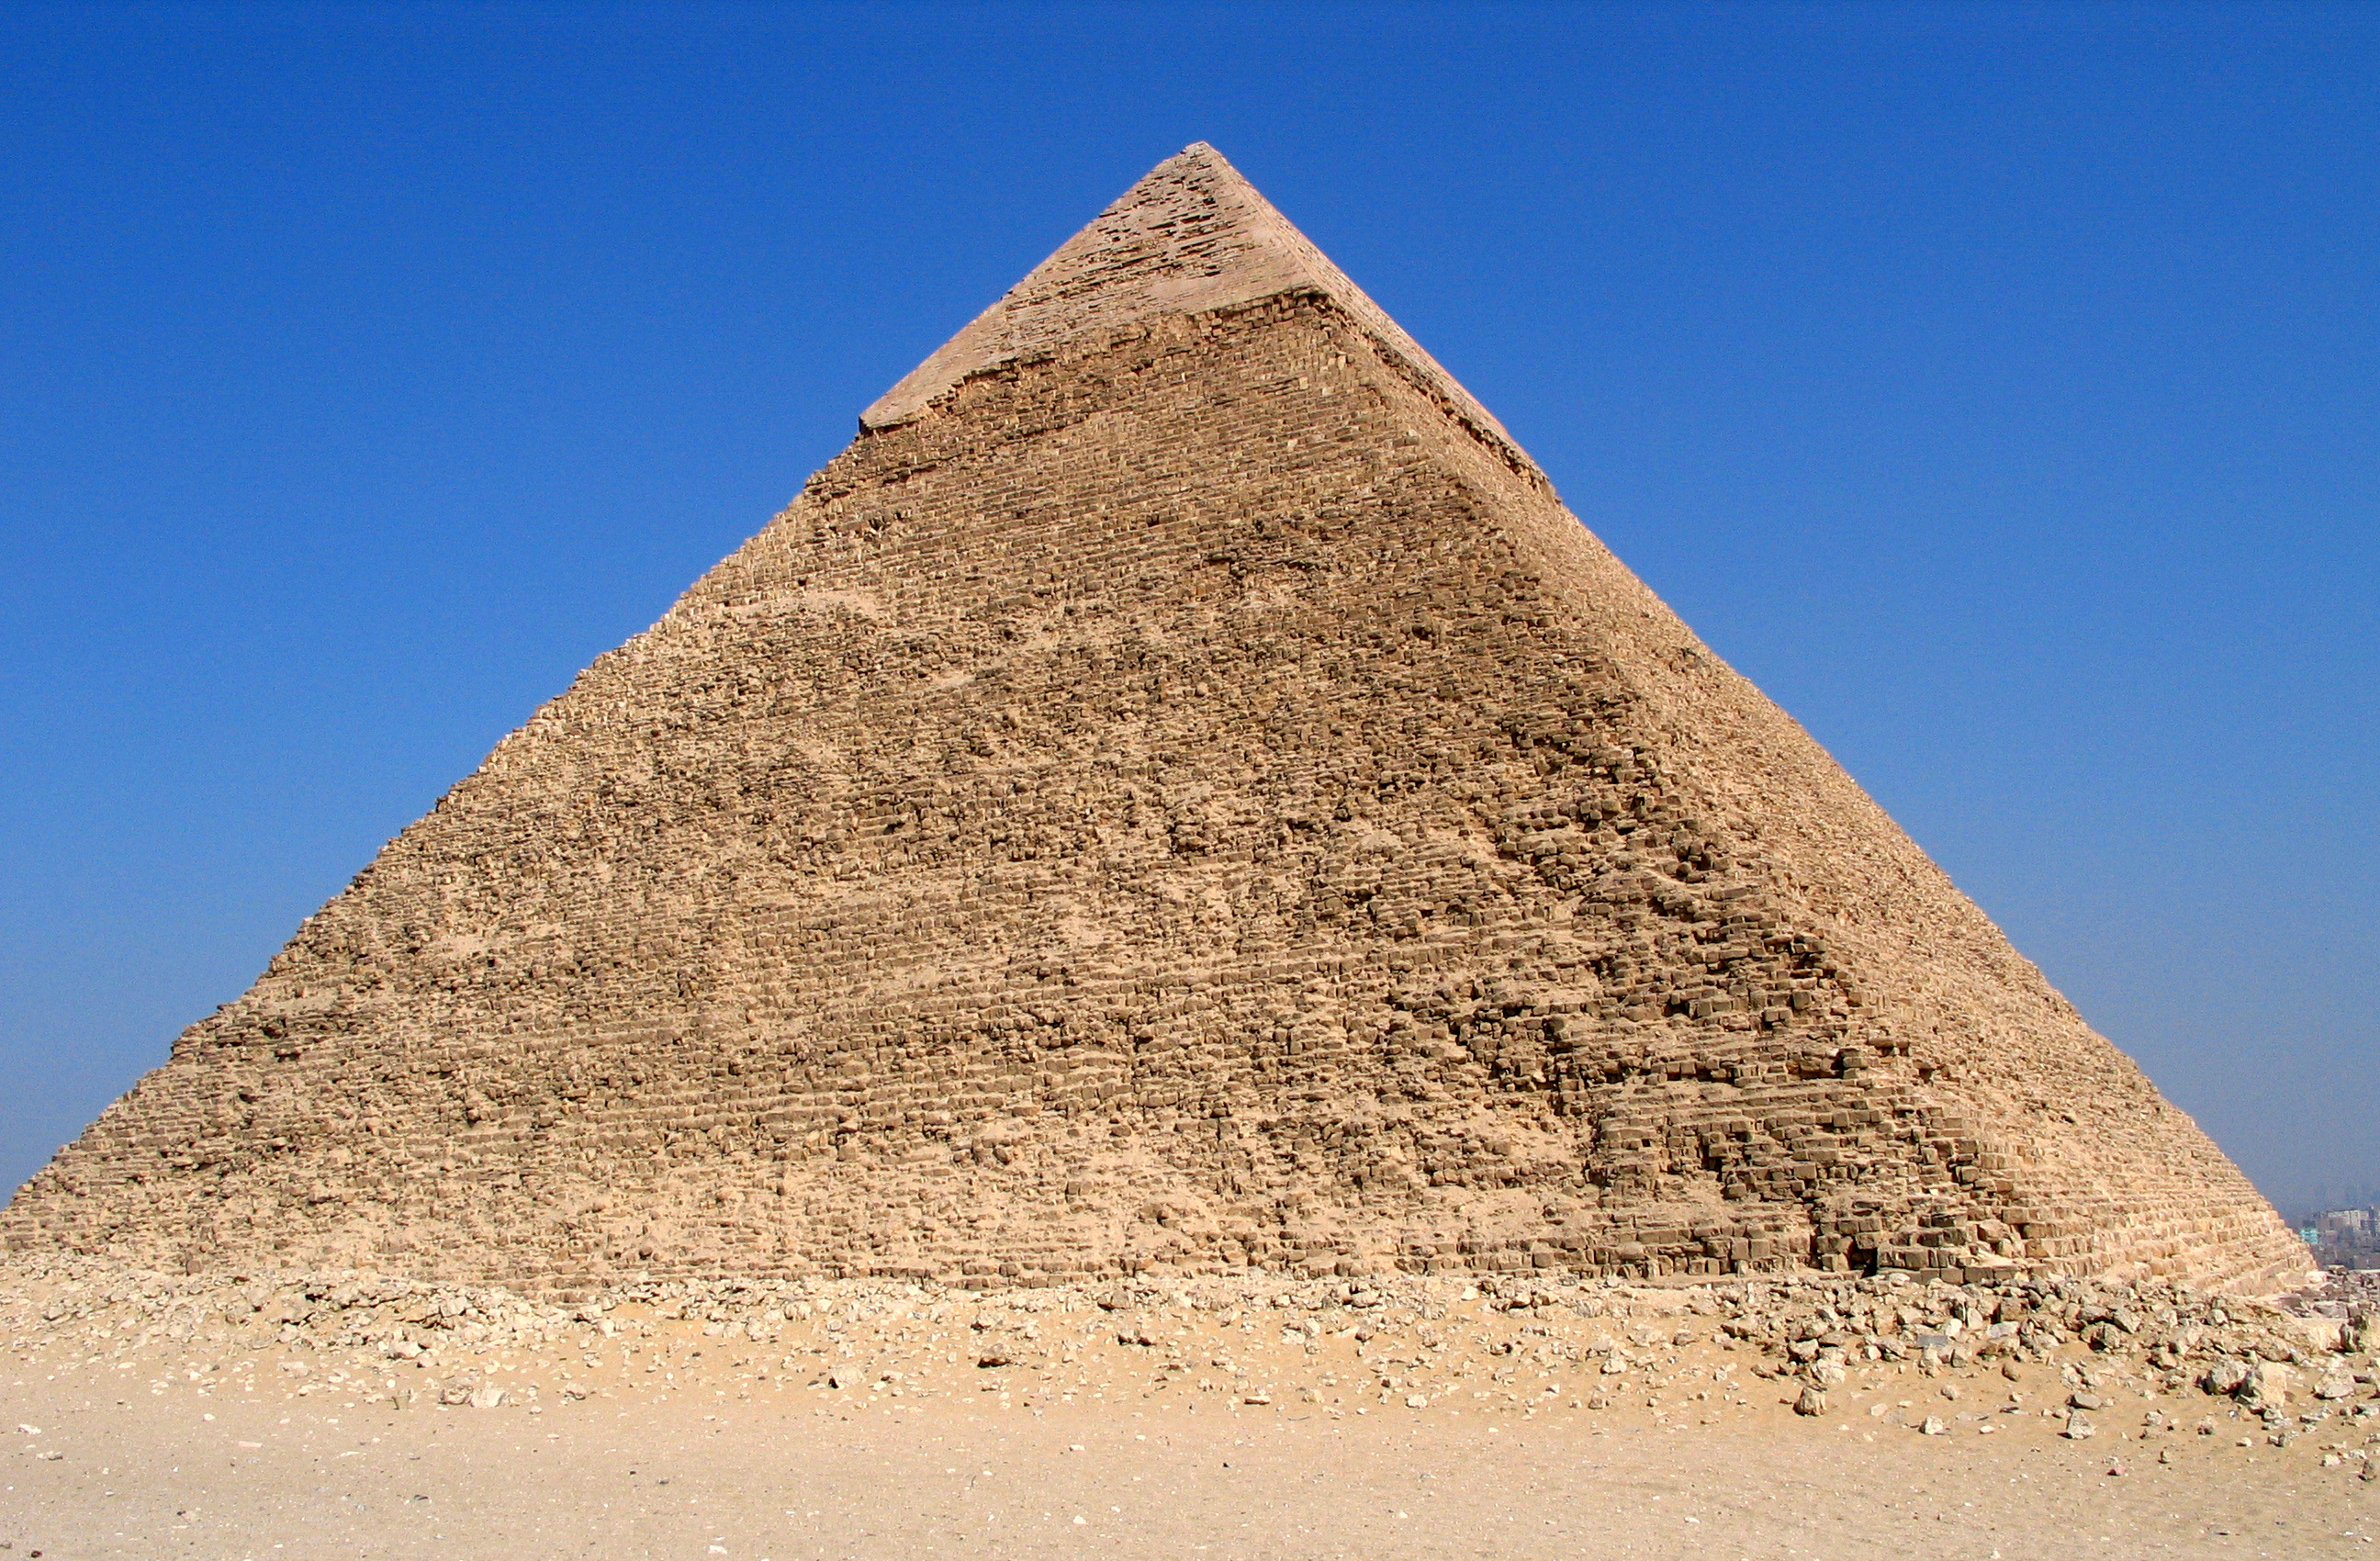 Download wallpapers Great Pyramid, 4k, desert, dust, Africa, Giza, Egypt  for desktop free. Pictures for desktop free